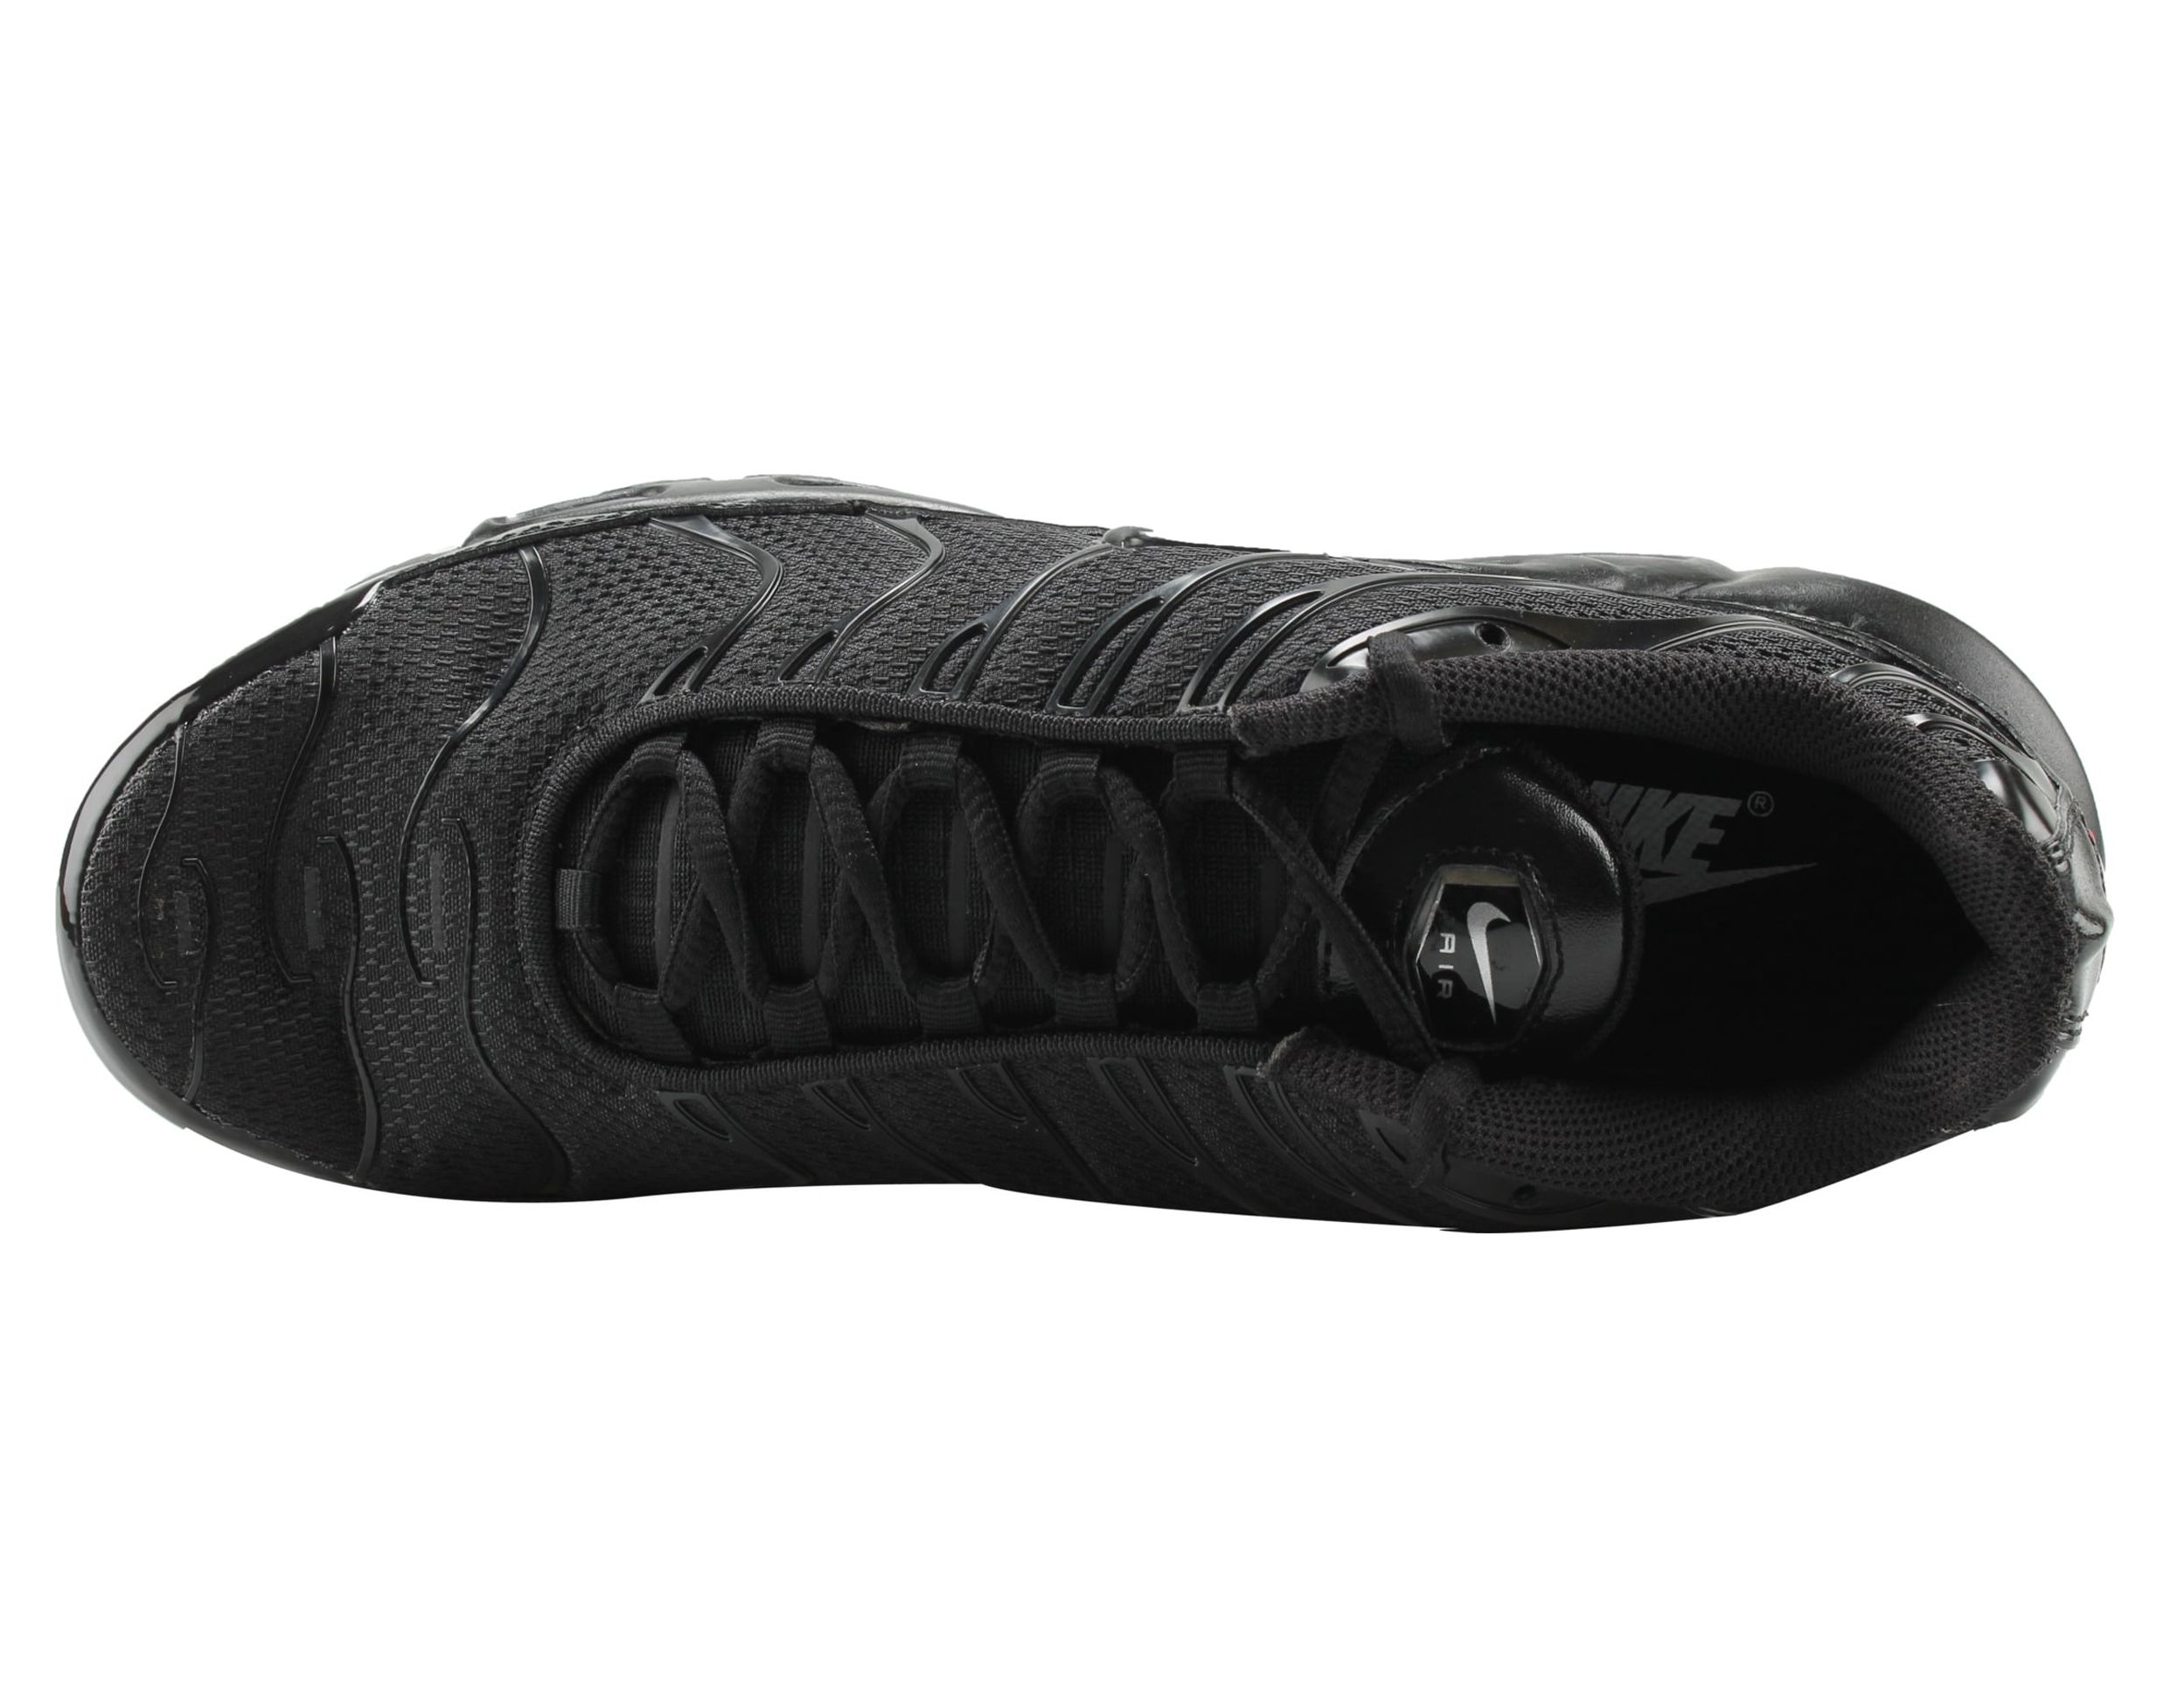 Nike Men's Air Max Plus Tuned 1 Fabric Trainer Shoes - image 4 of 6